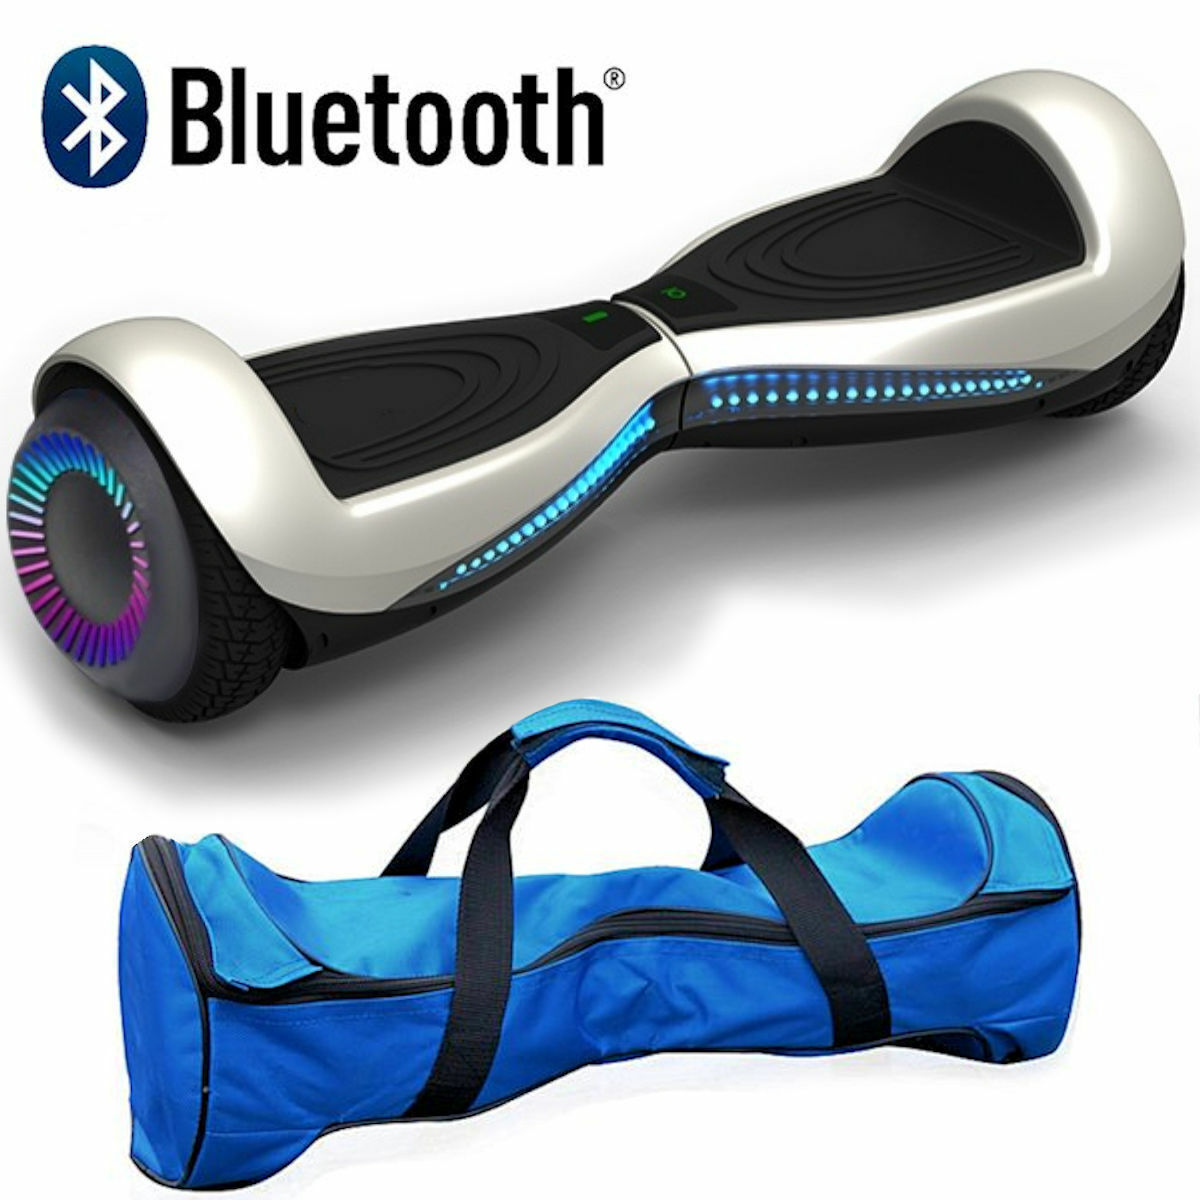 Bluetooth Hoverboard Electric Self Balancing Scooter not Bag Black+Gray UL2272 